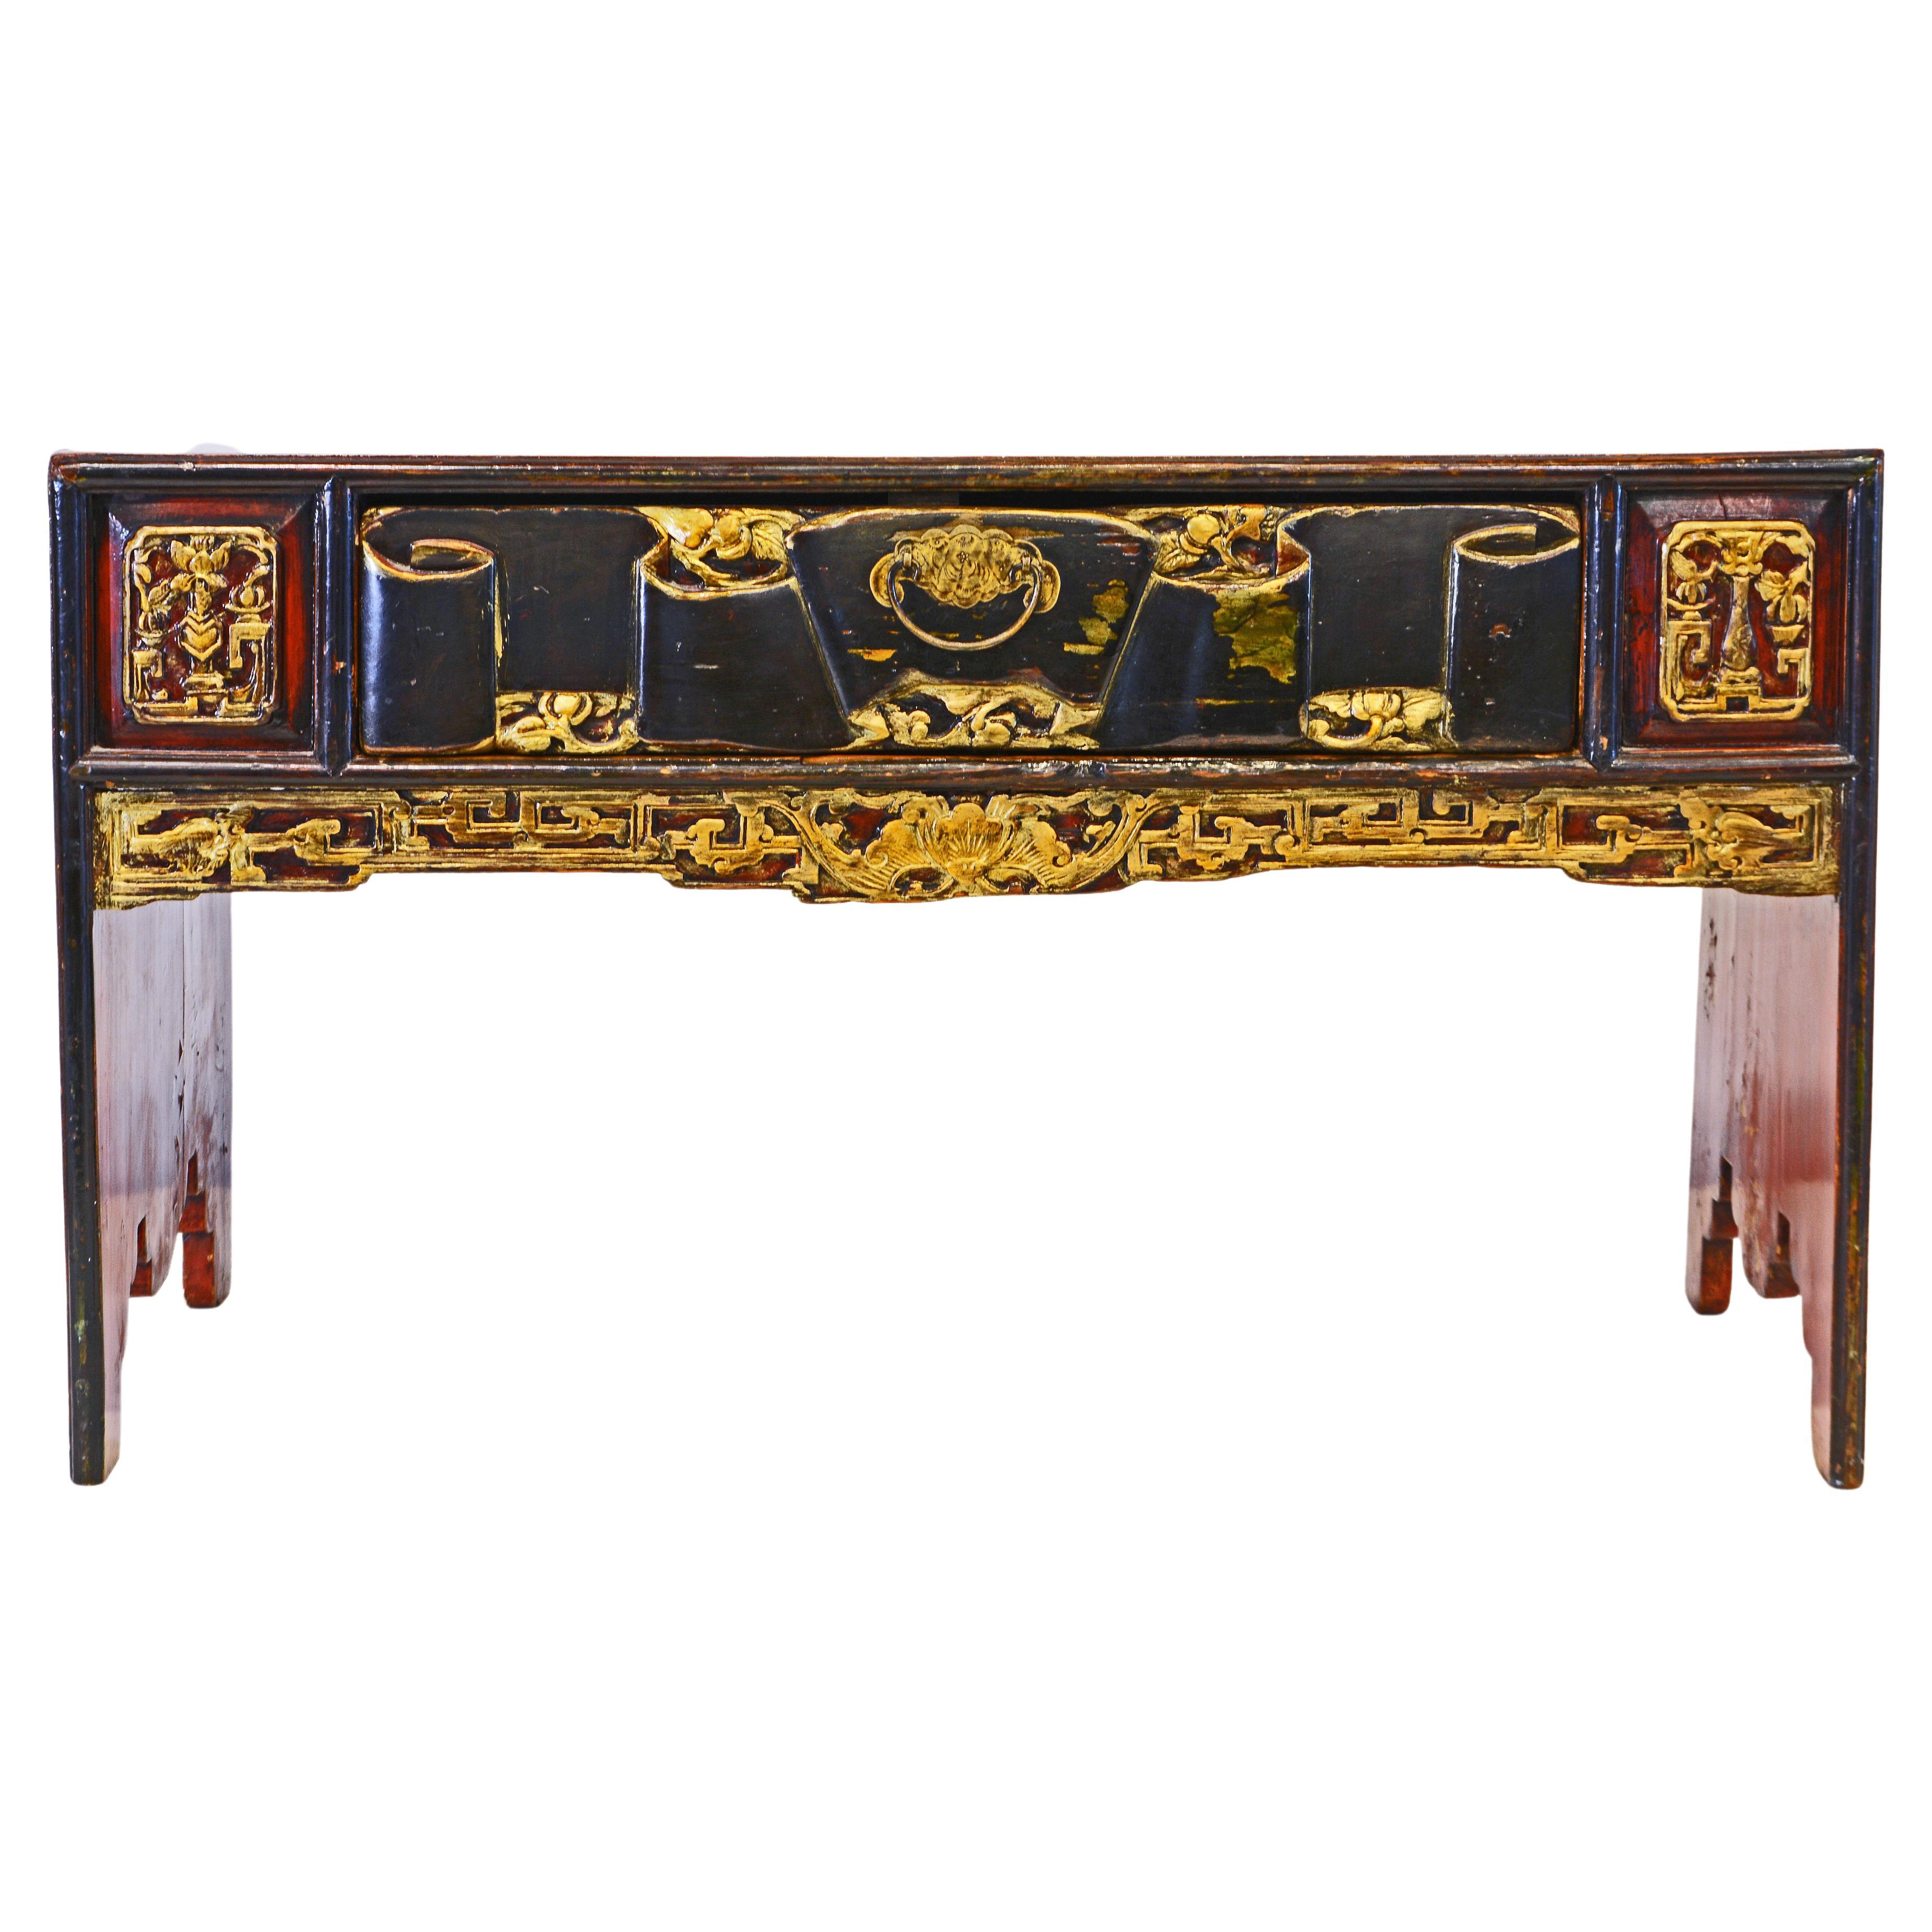 Antique 19th C. Chinese Carved Lacquer and Gilt Altar and Dislay Table